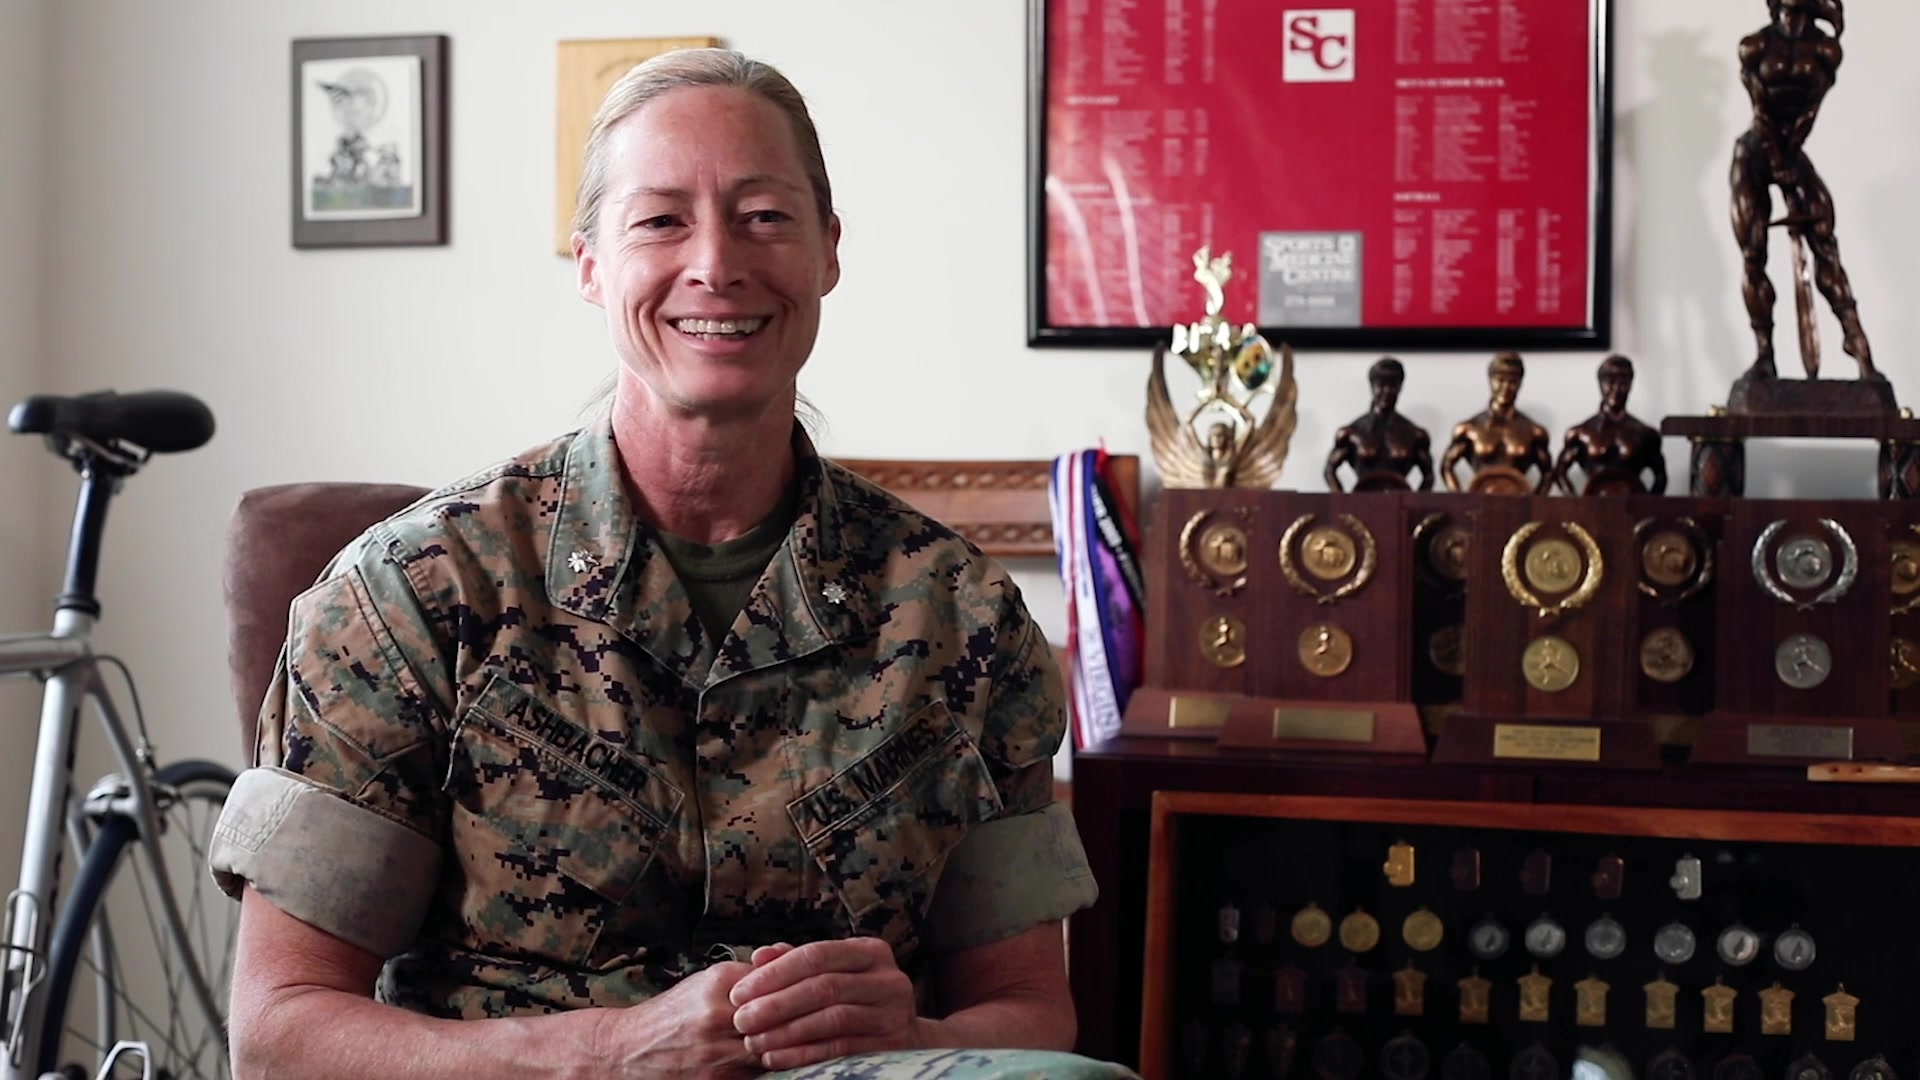 A Marine smiles while sitting and talking in a room in front of trophies and awards.